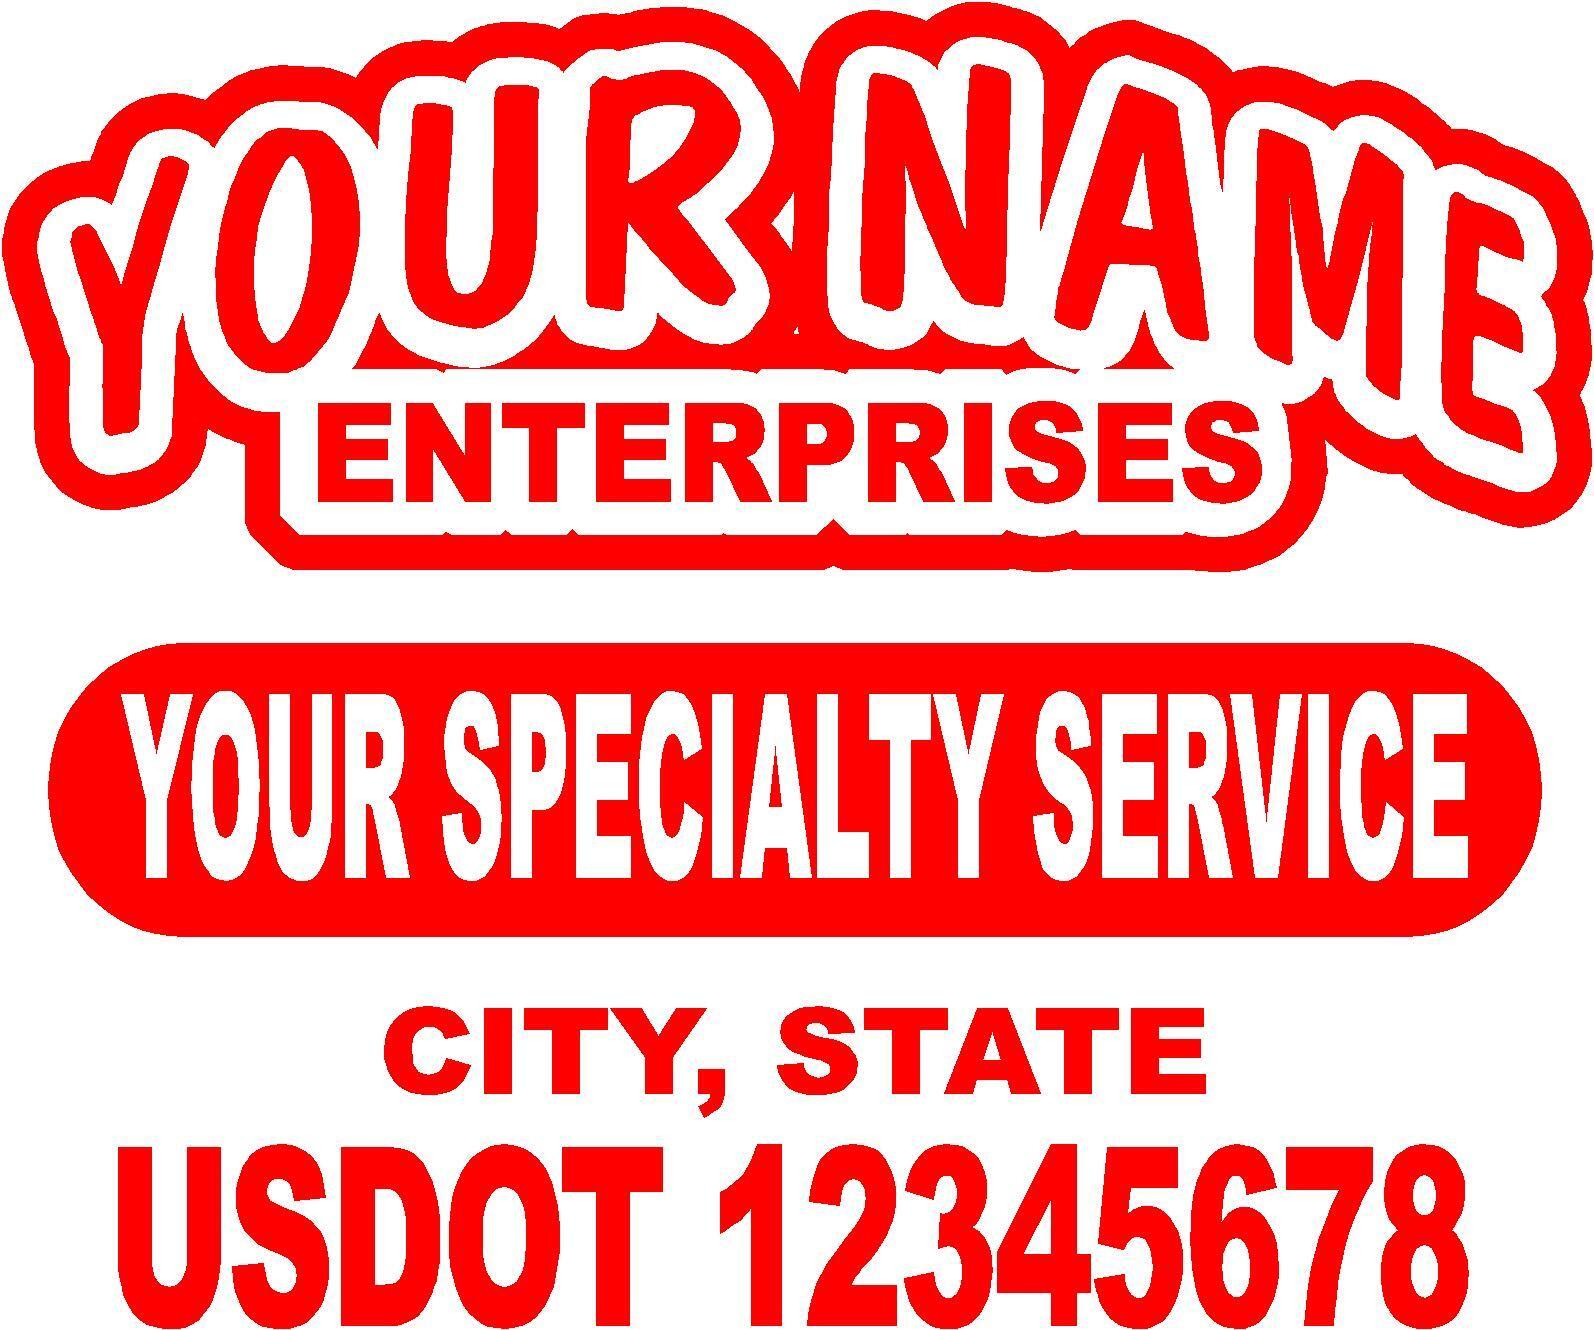 Semi Truck Lettering or Utility Trailer LETTERING - (1 sign) 22.5 X 18 inches